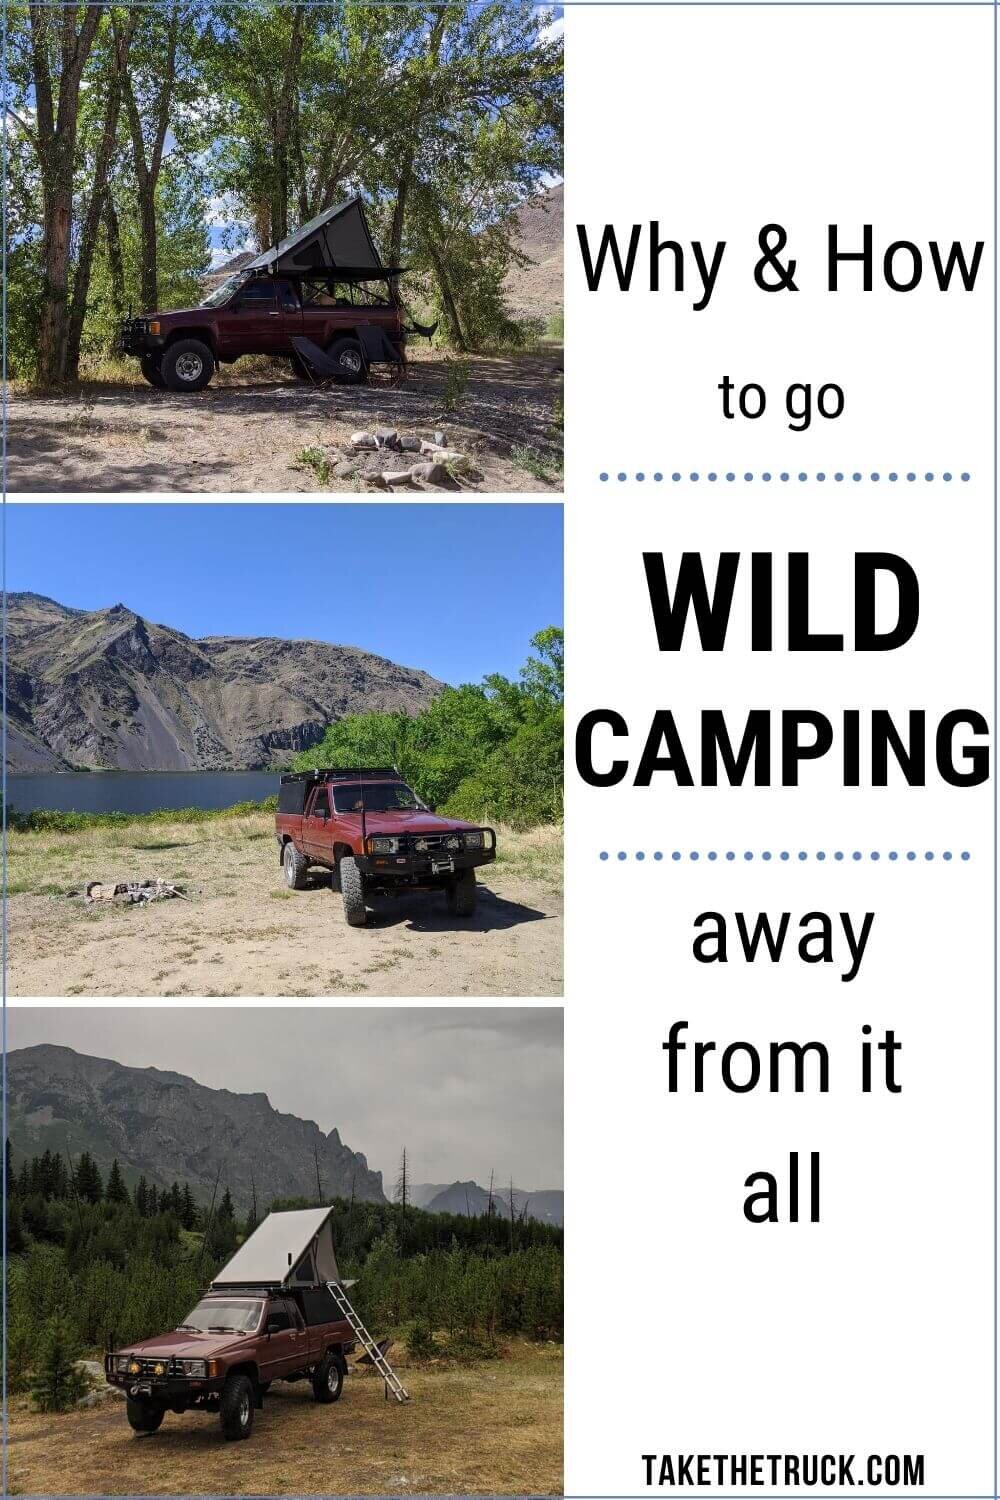 If you’ve never gone primitive camping off grid and don’t think you know how, read this post! It’s full of boondocking and wild camping tips, ideas, and gear to make wild camping comfortable.